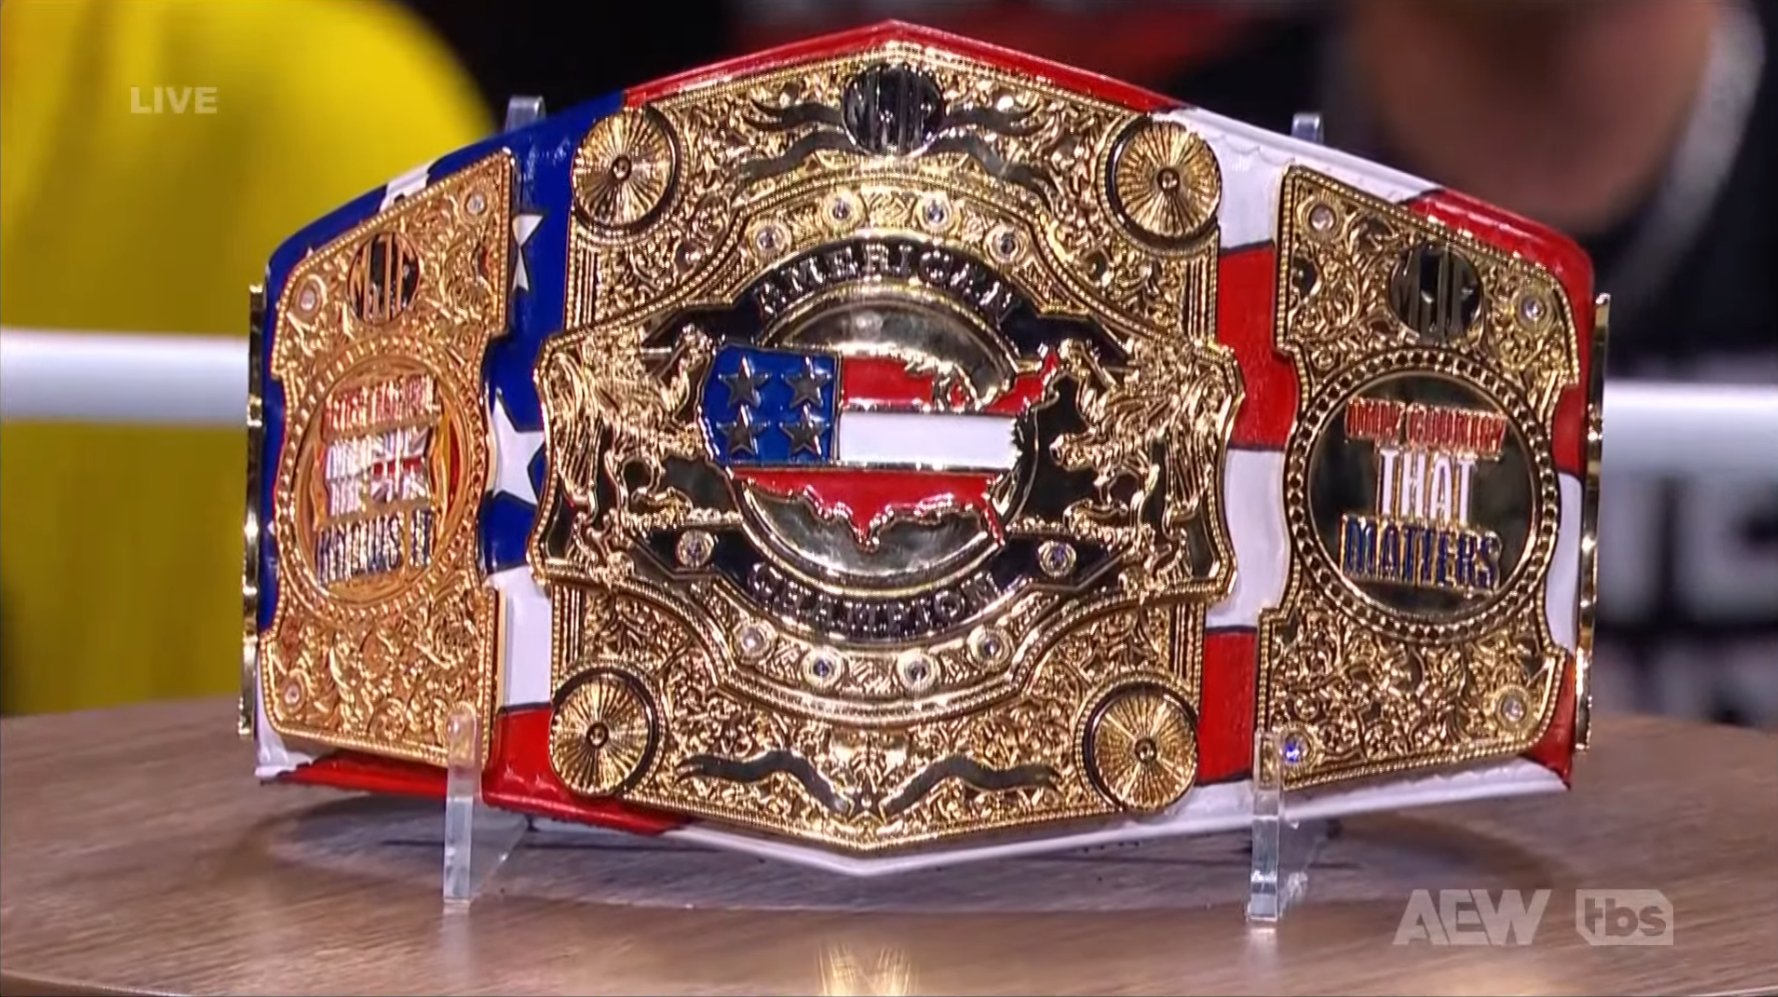 The International Championship held by MJF has been rebranded as the AEW American Championship.